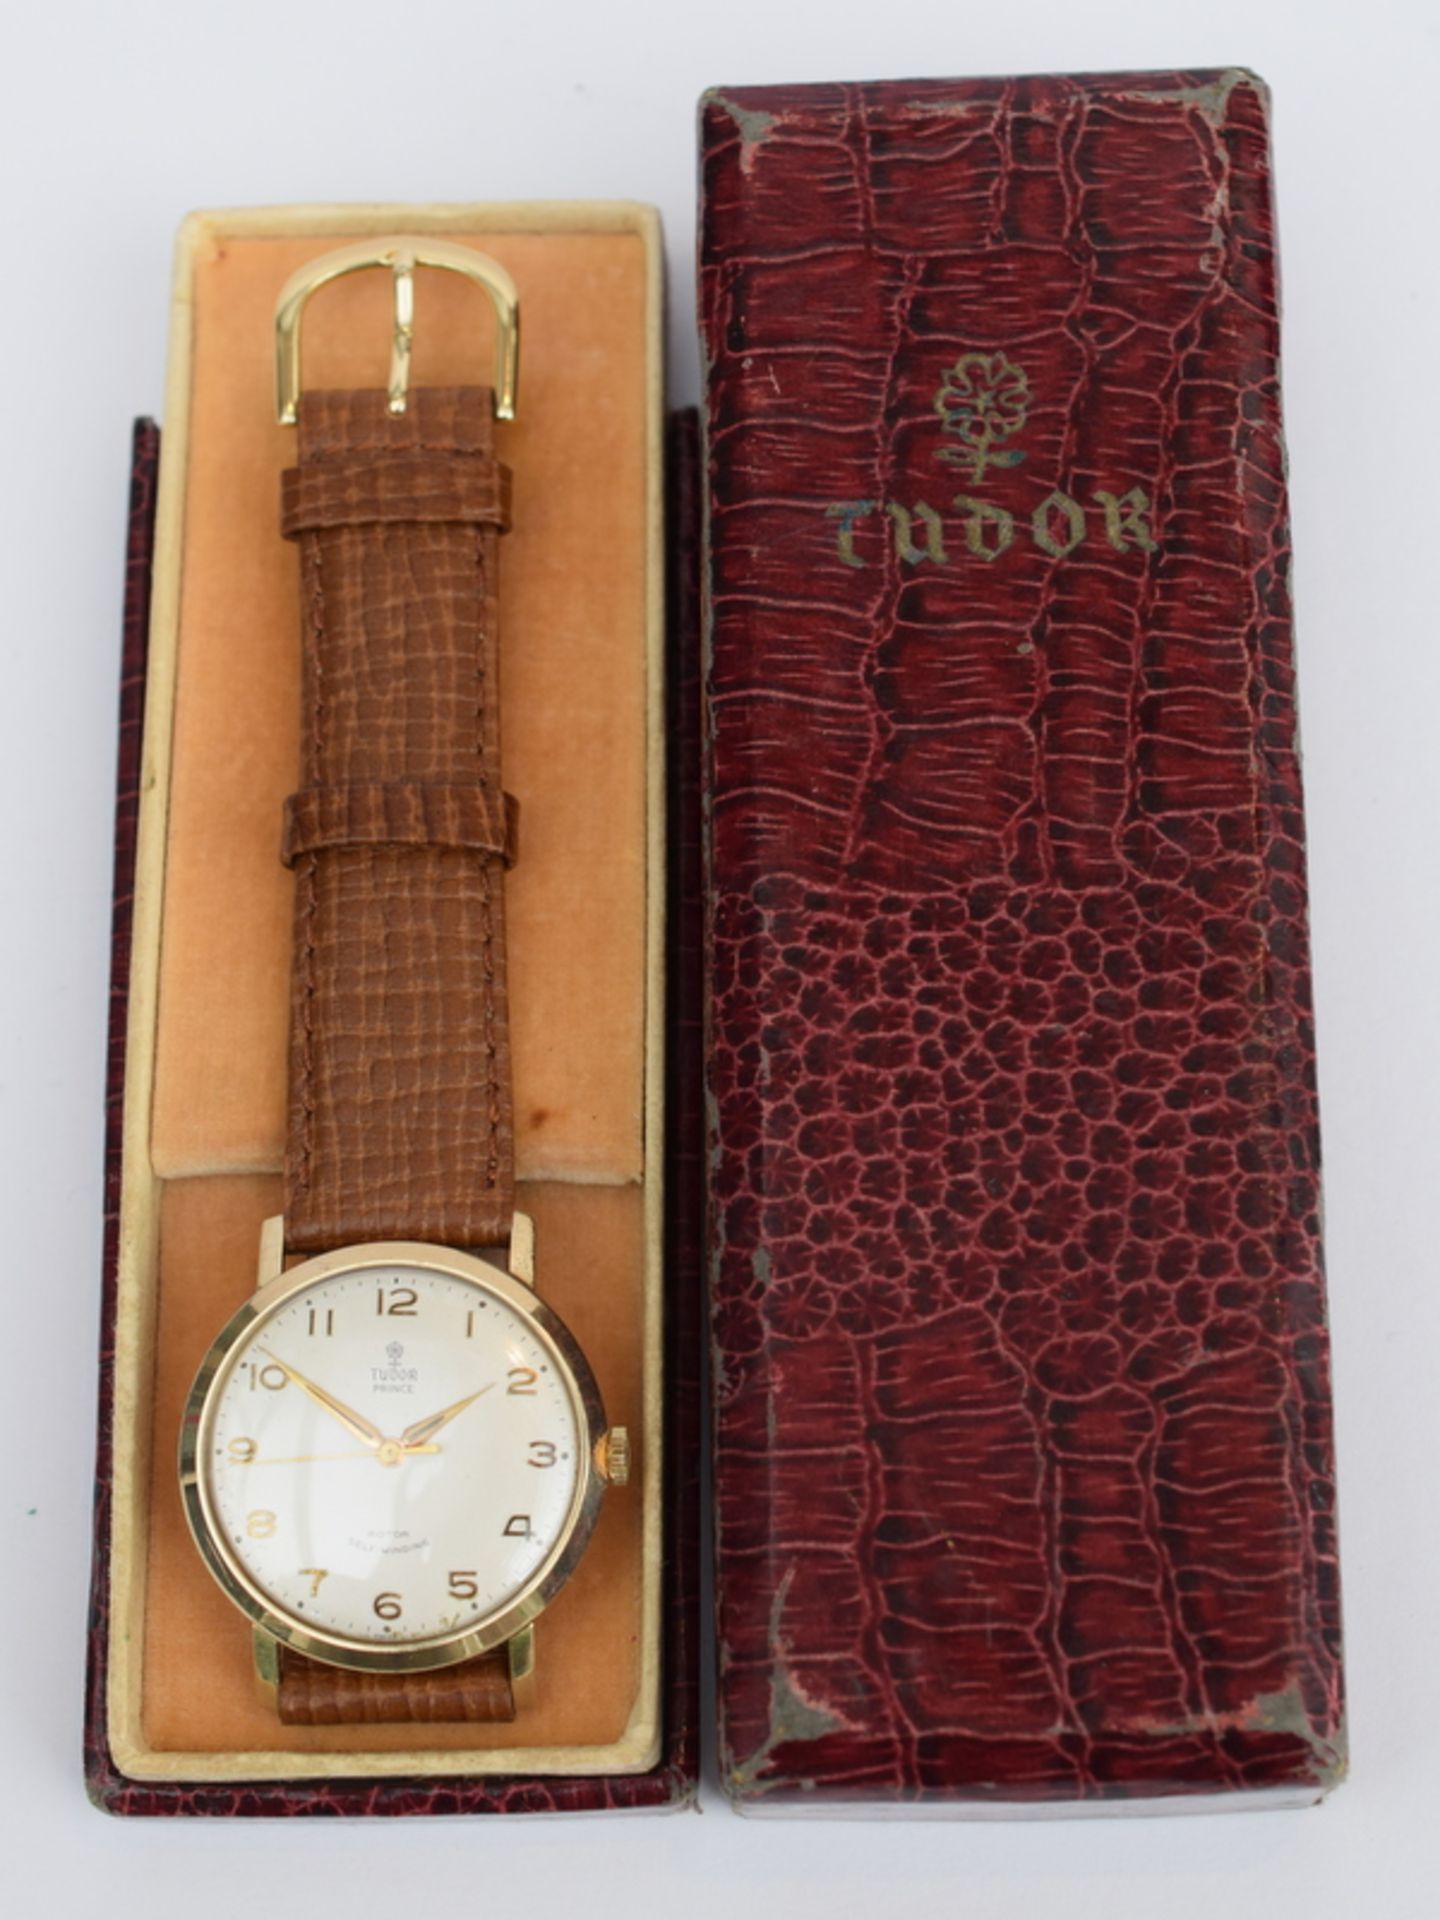 Rolex Tudor Prince 9ct Gold Watch - Image 2 of 10